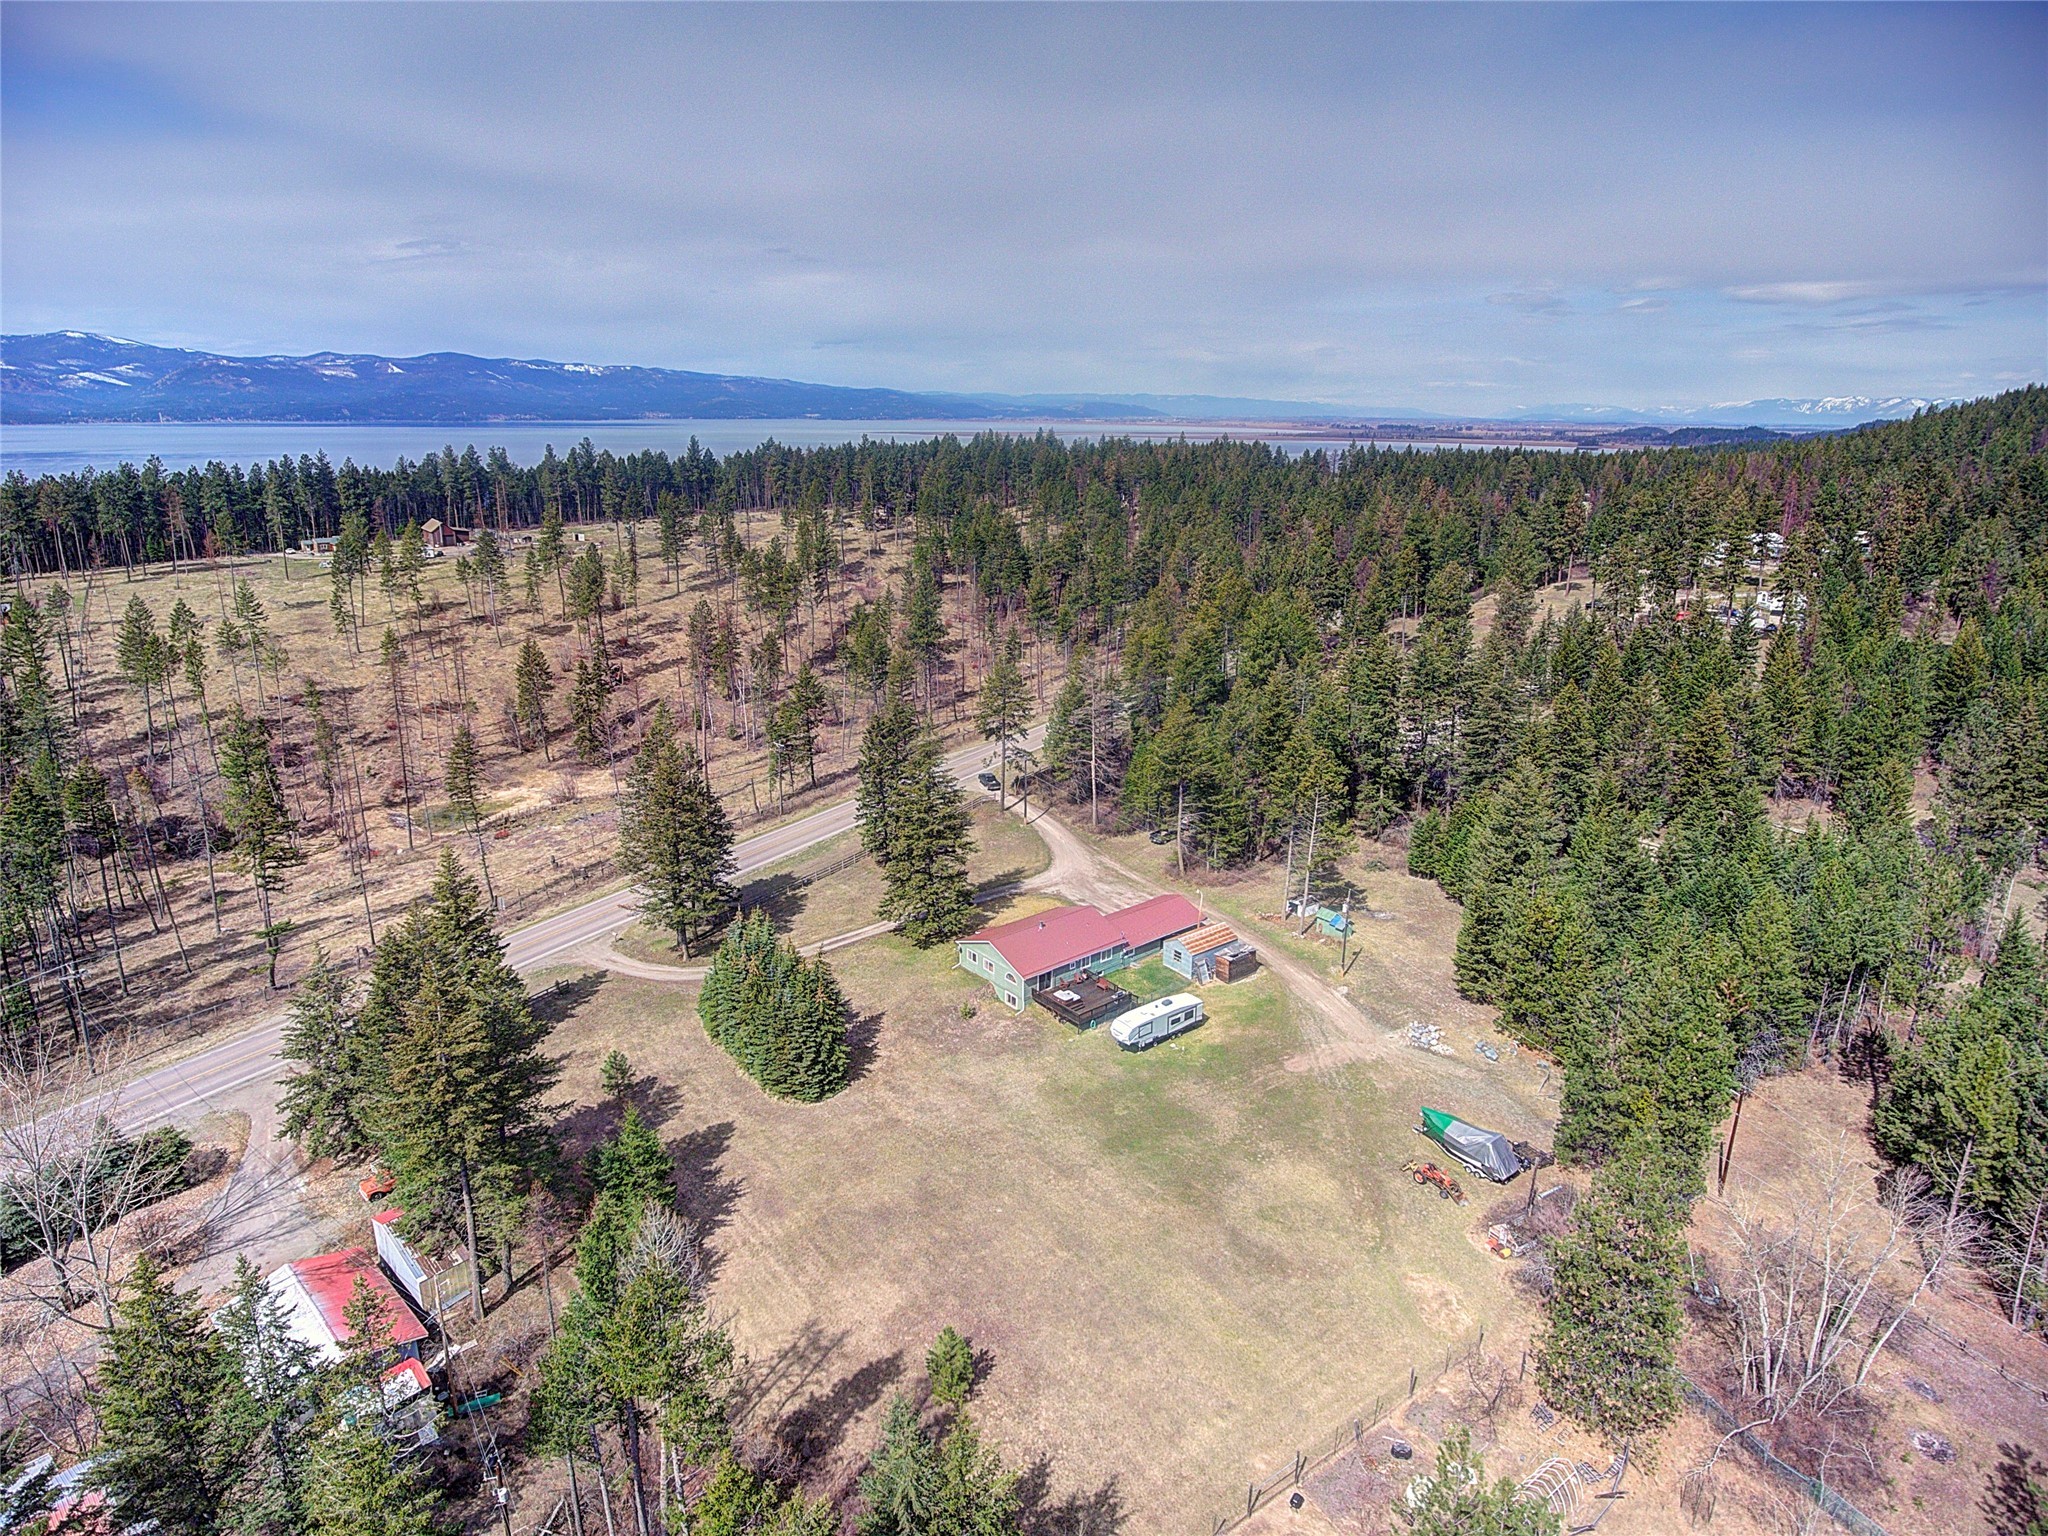 The potentials are endless with 3.5 "Un-zoned" level acres and 450' of Mt Highway 35 frontage.  Boat Storage, Cherry Orchard, Vacation Rentals are all possibilities.
  
For more information, Call Larry Sartain at 406-871-5000 or your real estate professional.